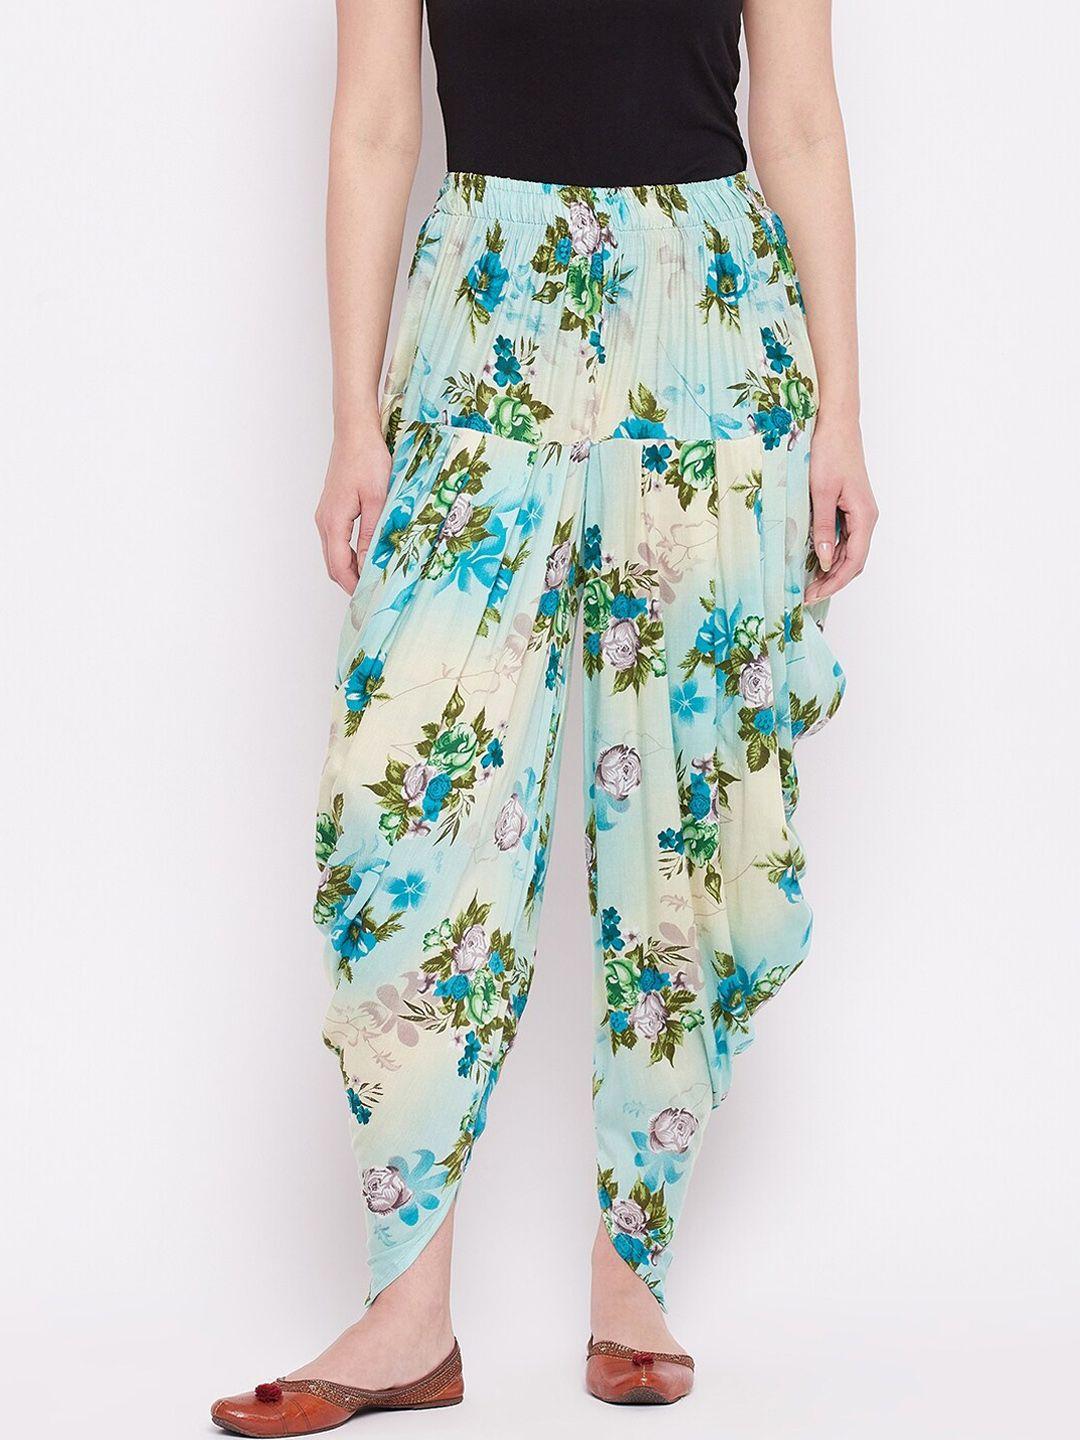 castle lifestyle women turquoise blue floral printed rayon dhoti pants